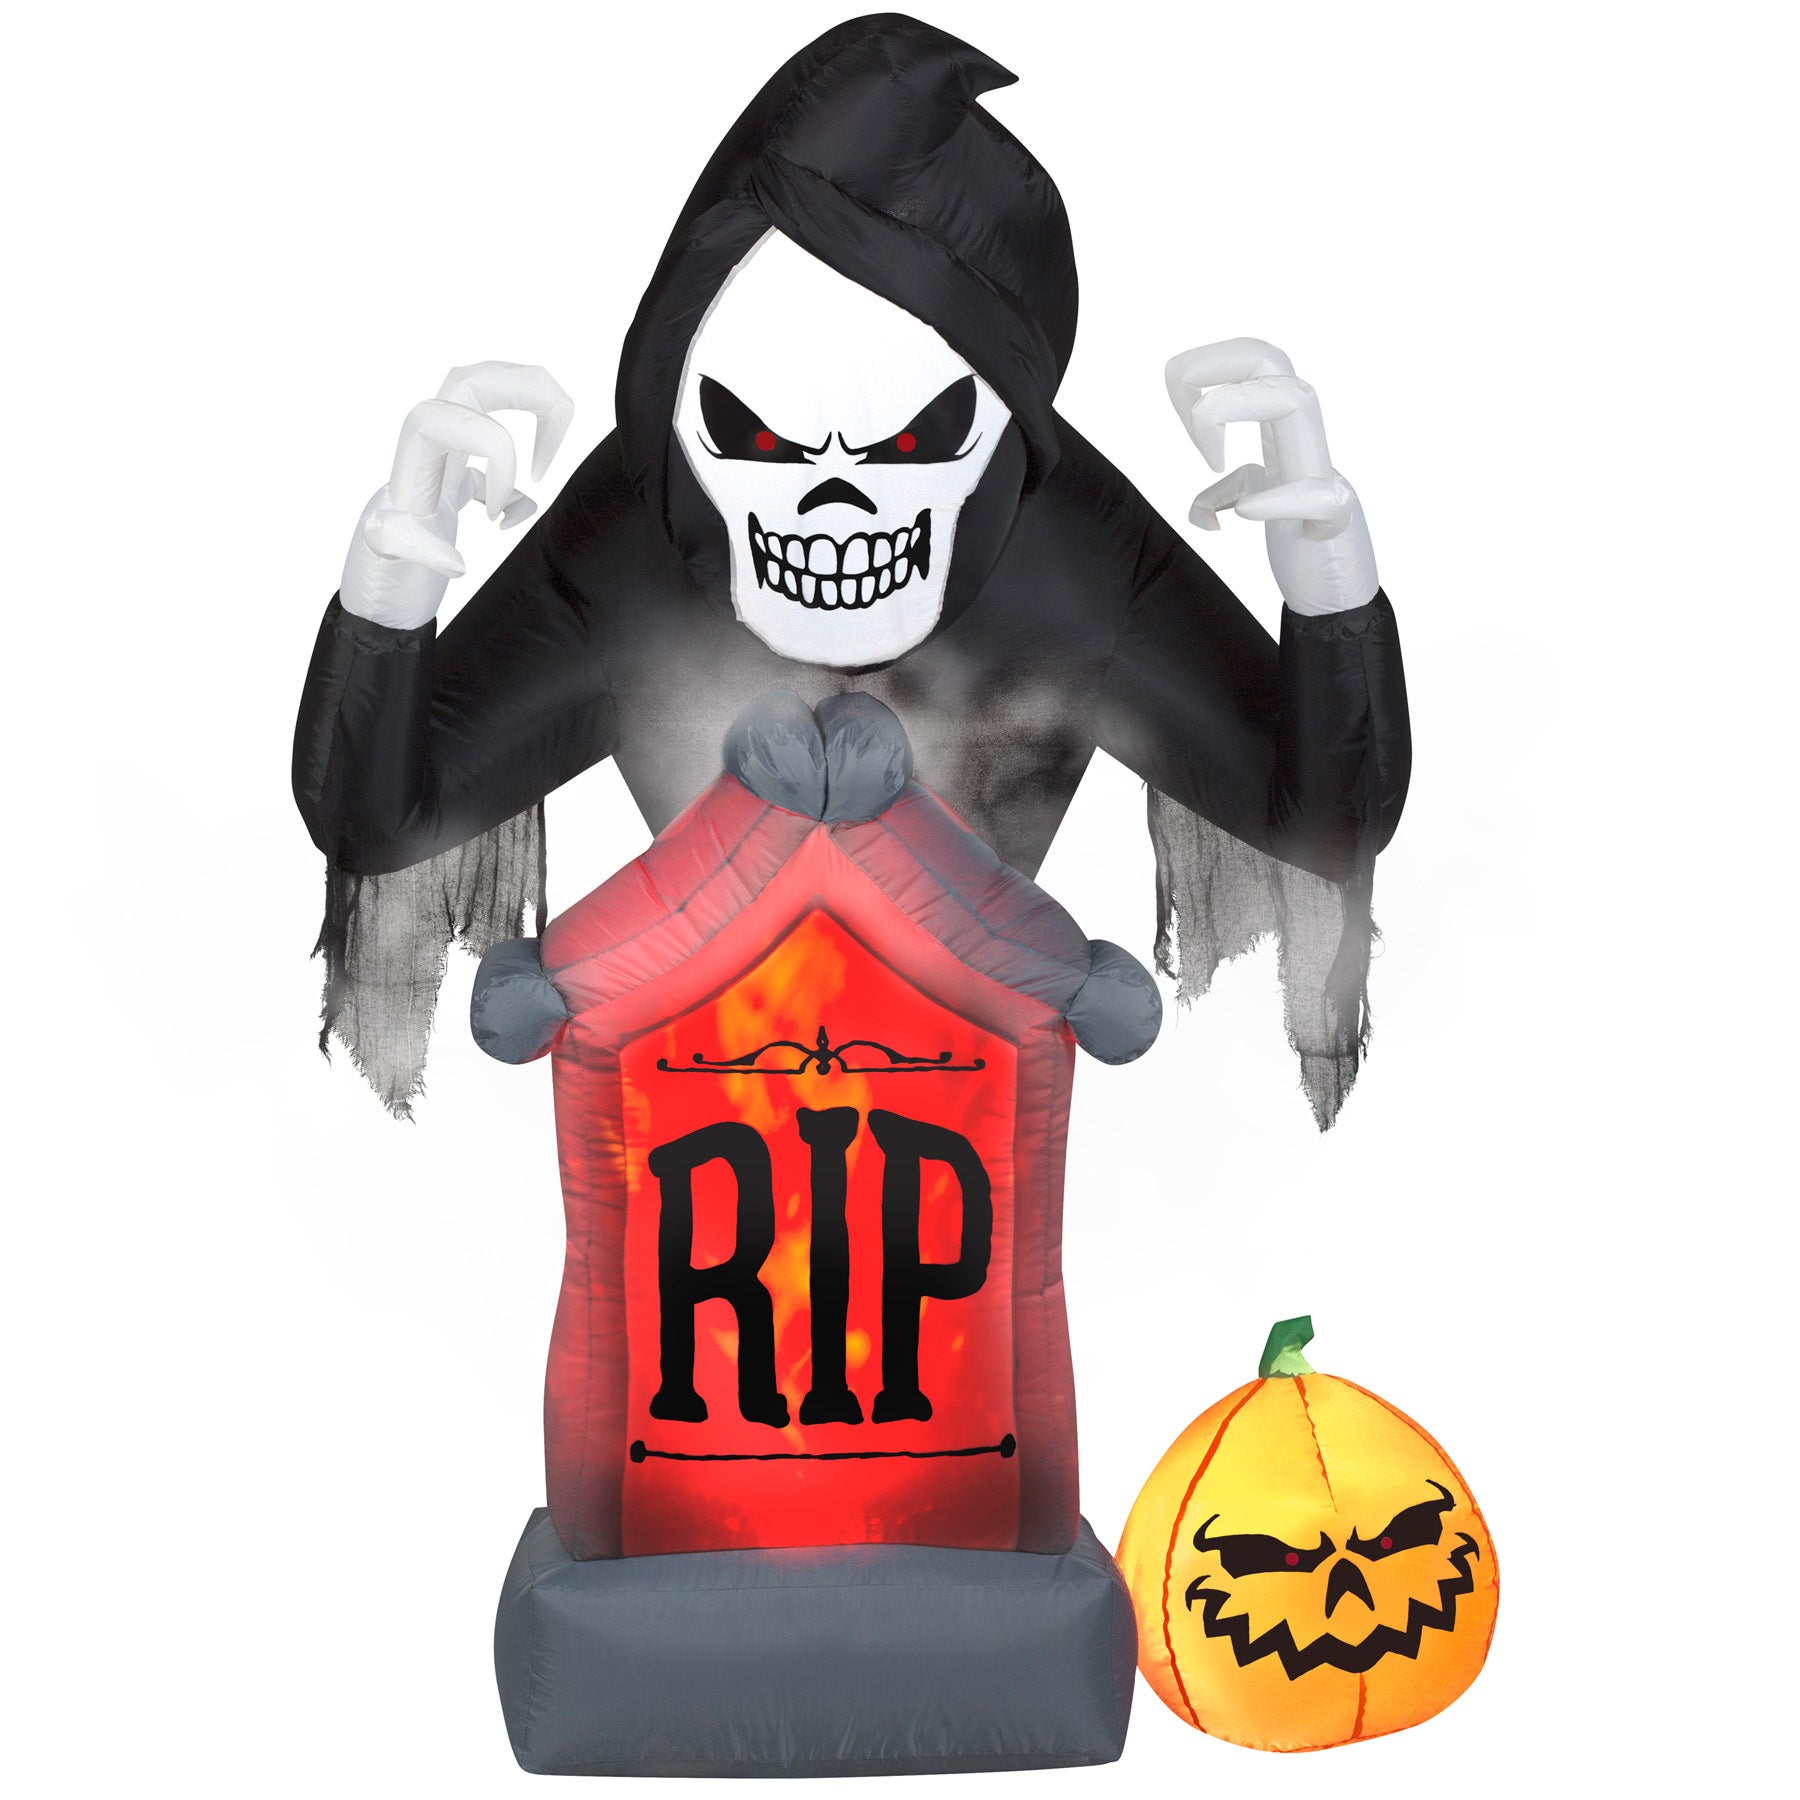 6' Animated Projection Airblown Fog Effect Fire & Ice-Shaking Reaper w/ Tombstone and Pumpkin Scene Halloween Inflatable